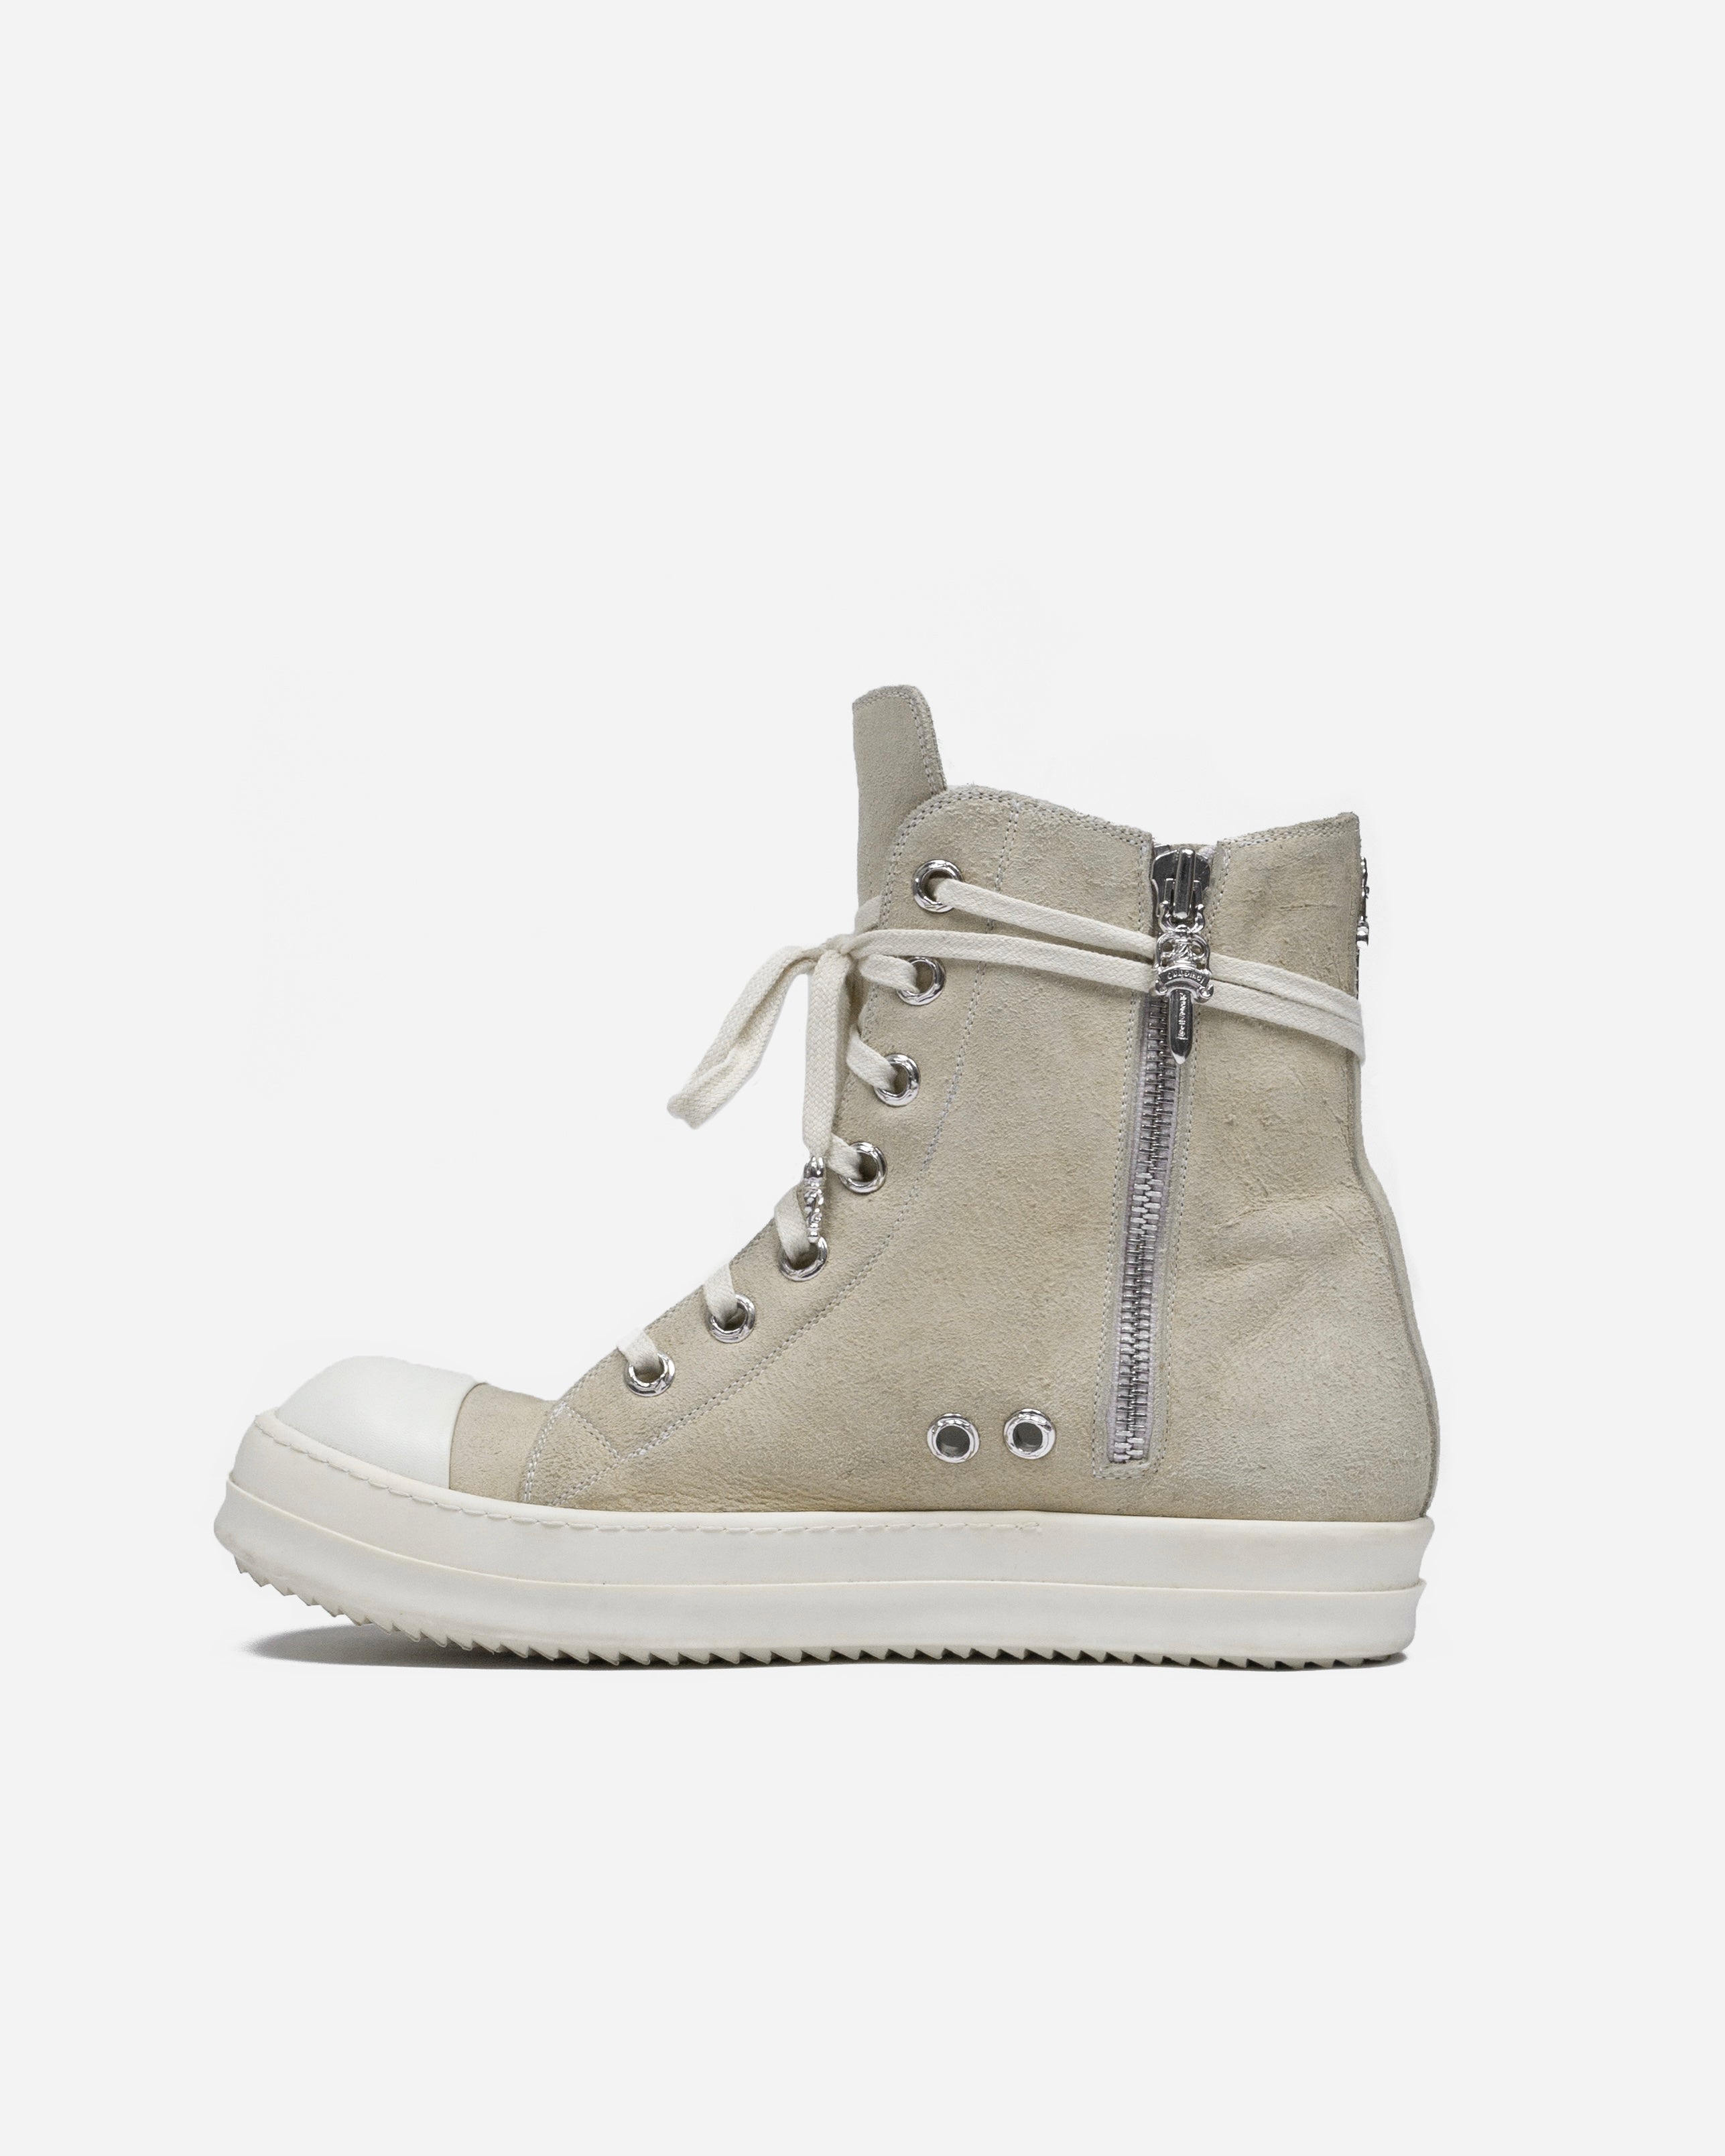 Rick Owens x Chrome Hearts Suede Ramones Sneakers - SILVER LEAGUE